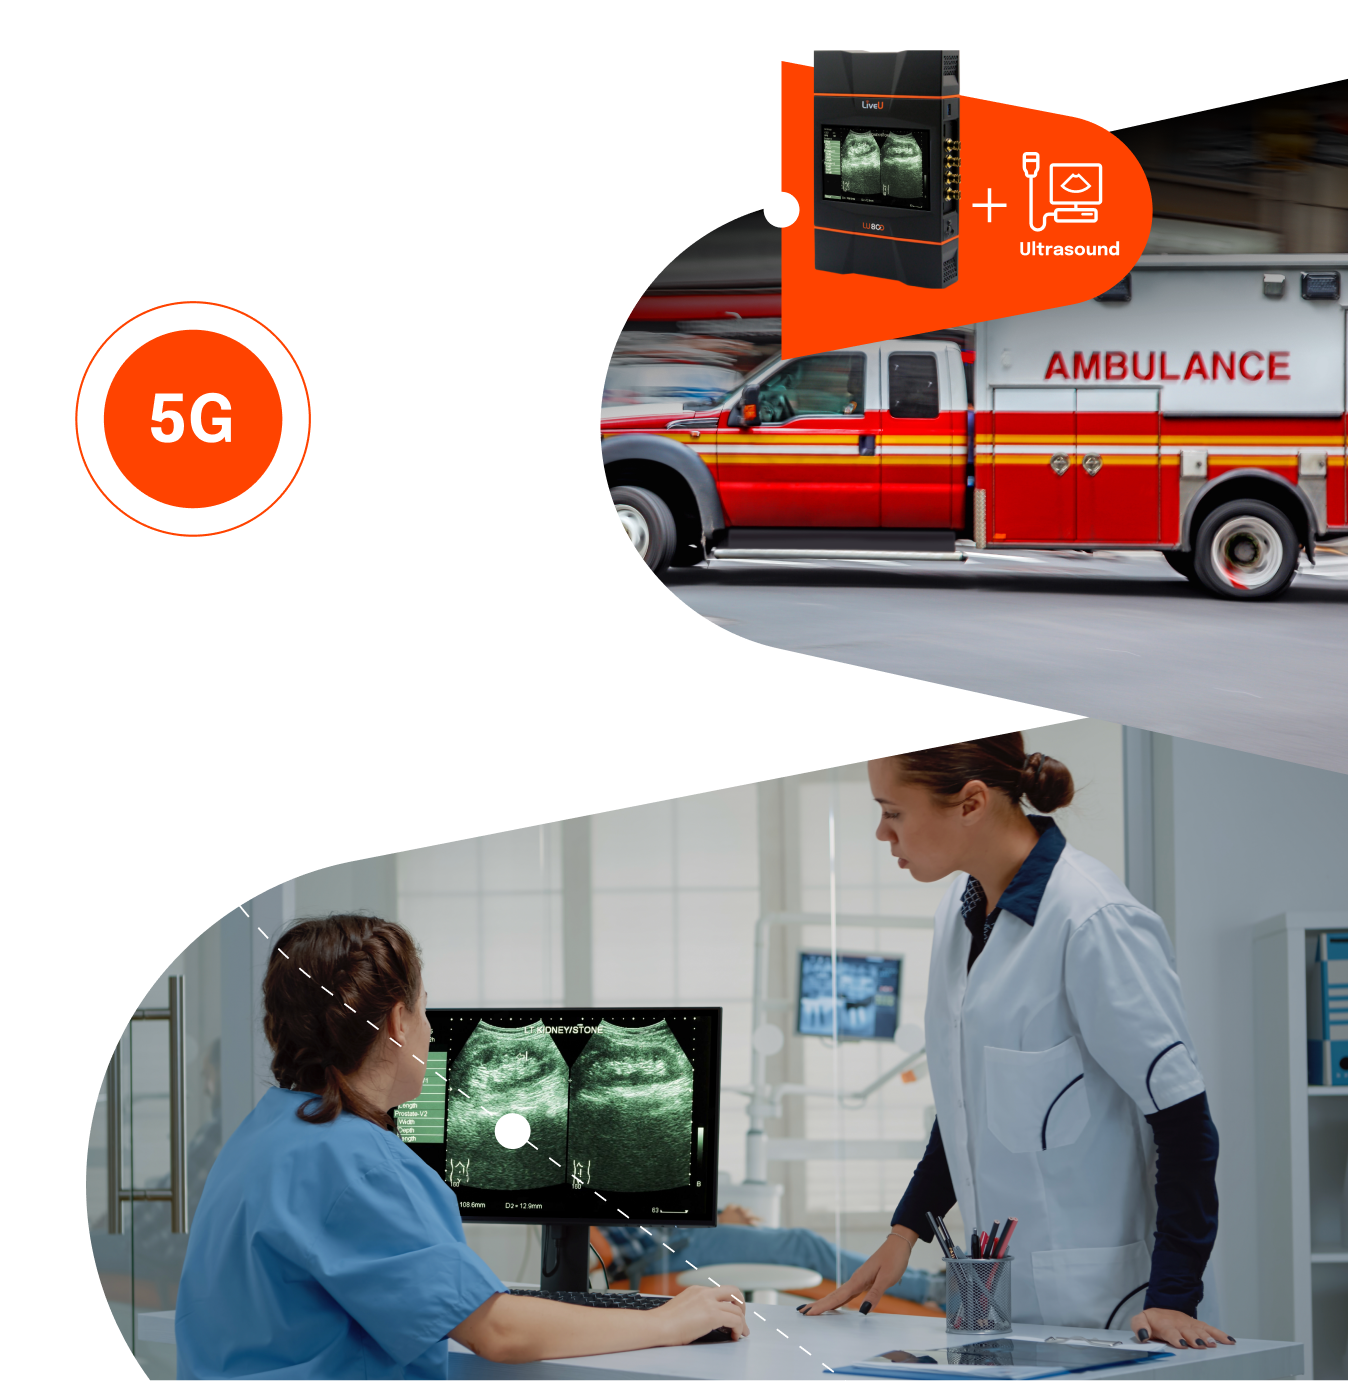 Real-time, secure medical care from anywhere